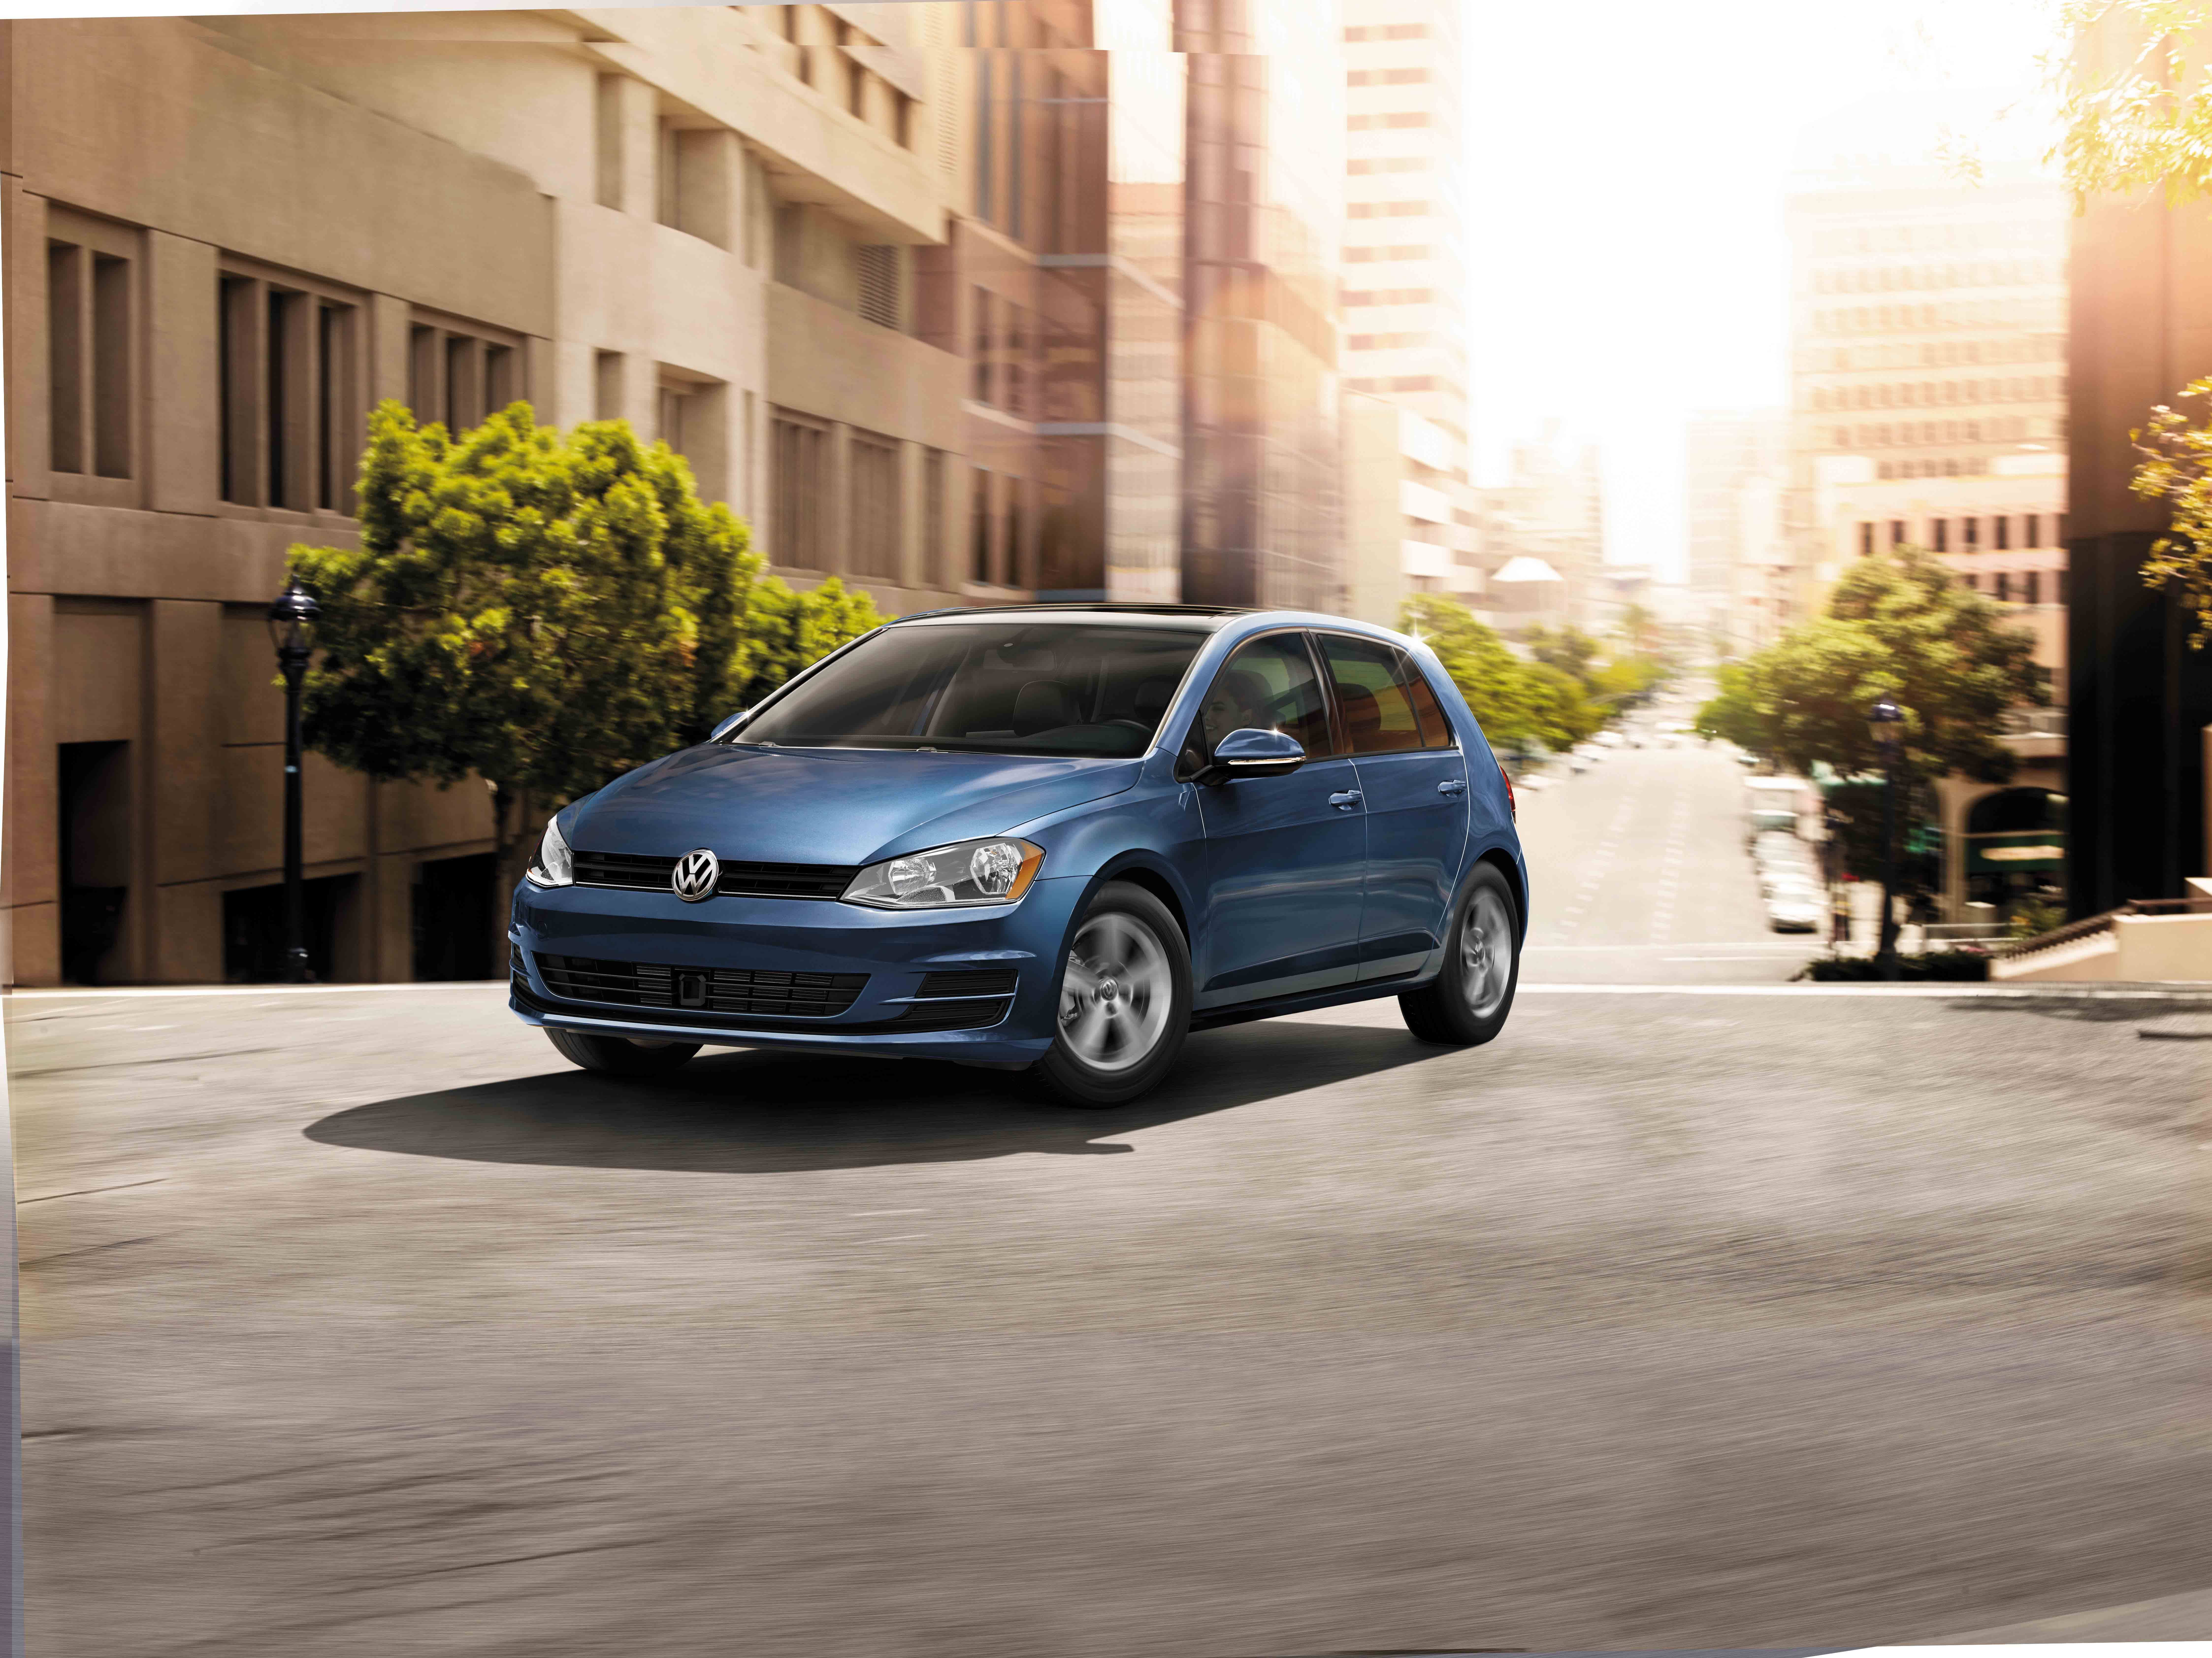 Lease a Volkswagen in Tampa, FL